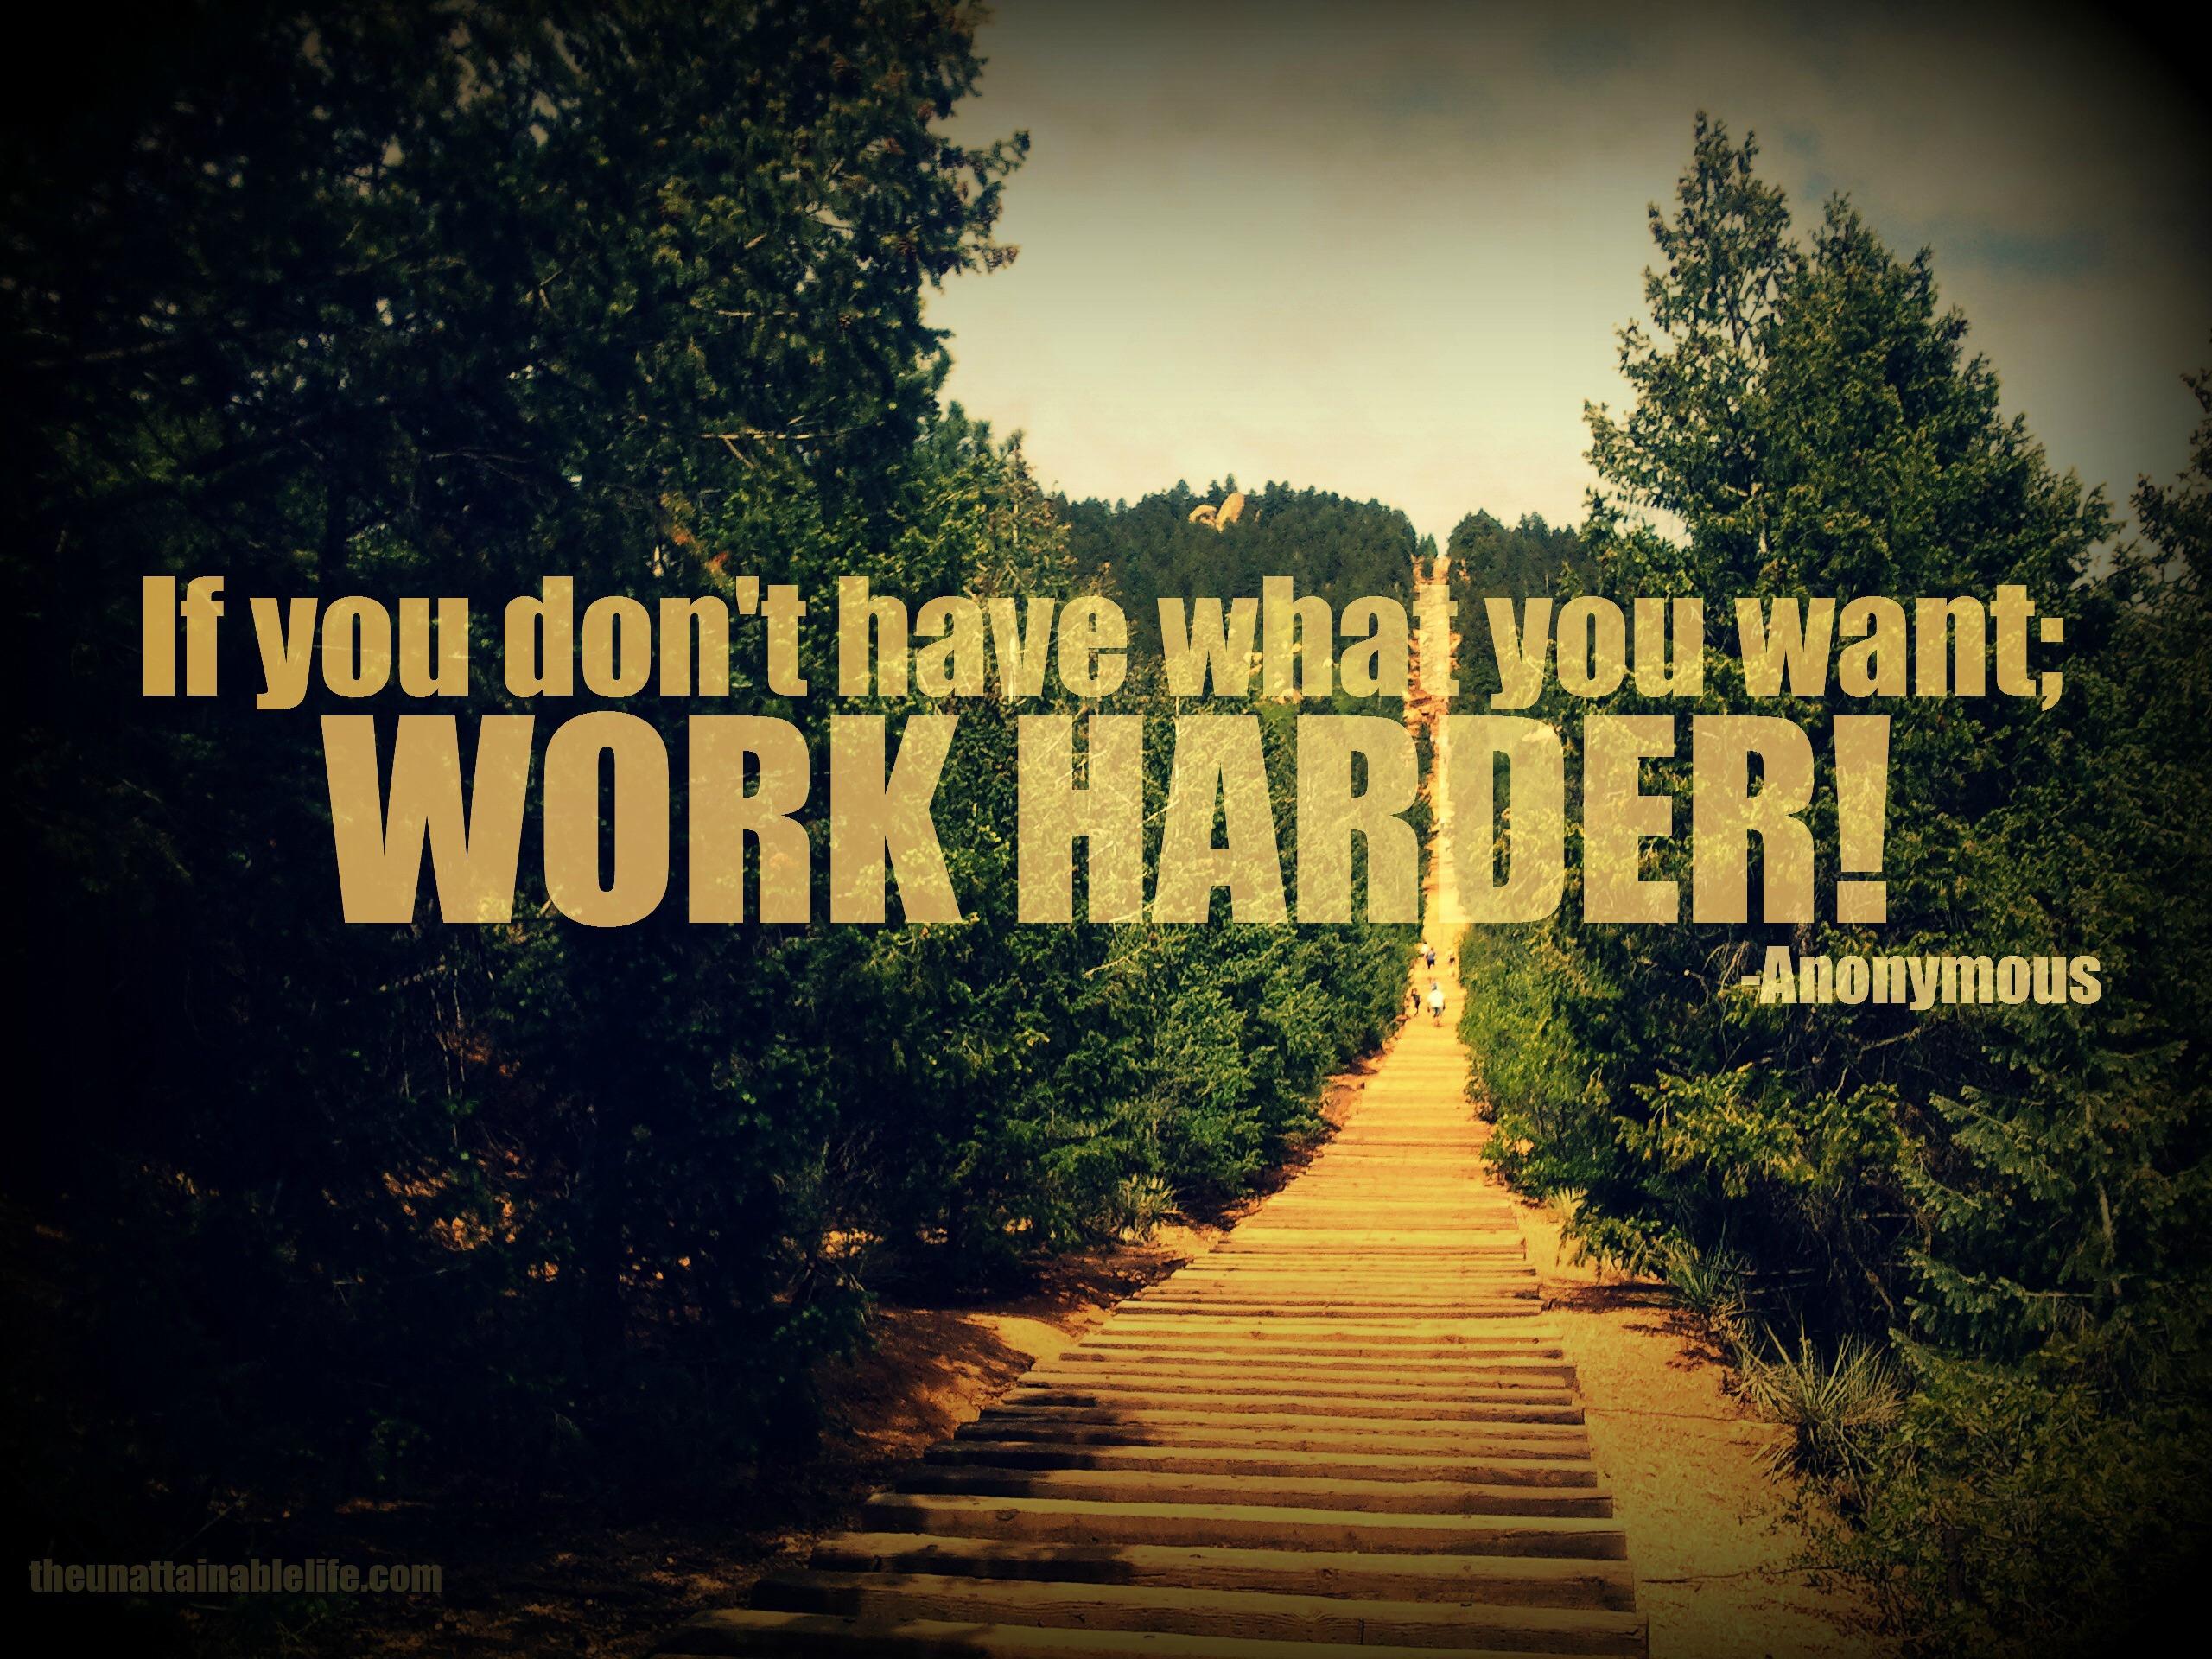 Work Harder Motivational Daily Quotes Sayings Pictures